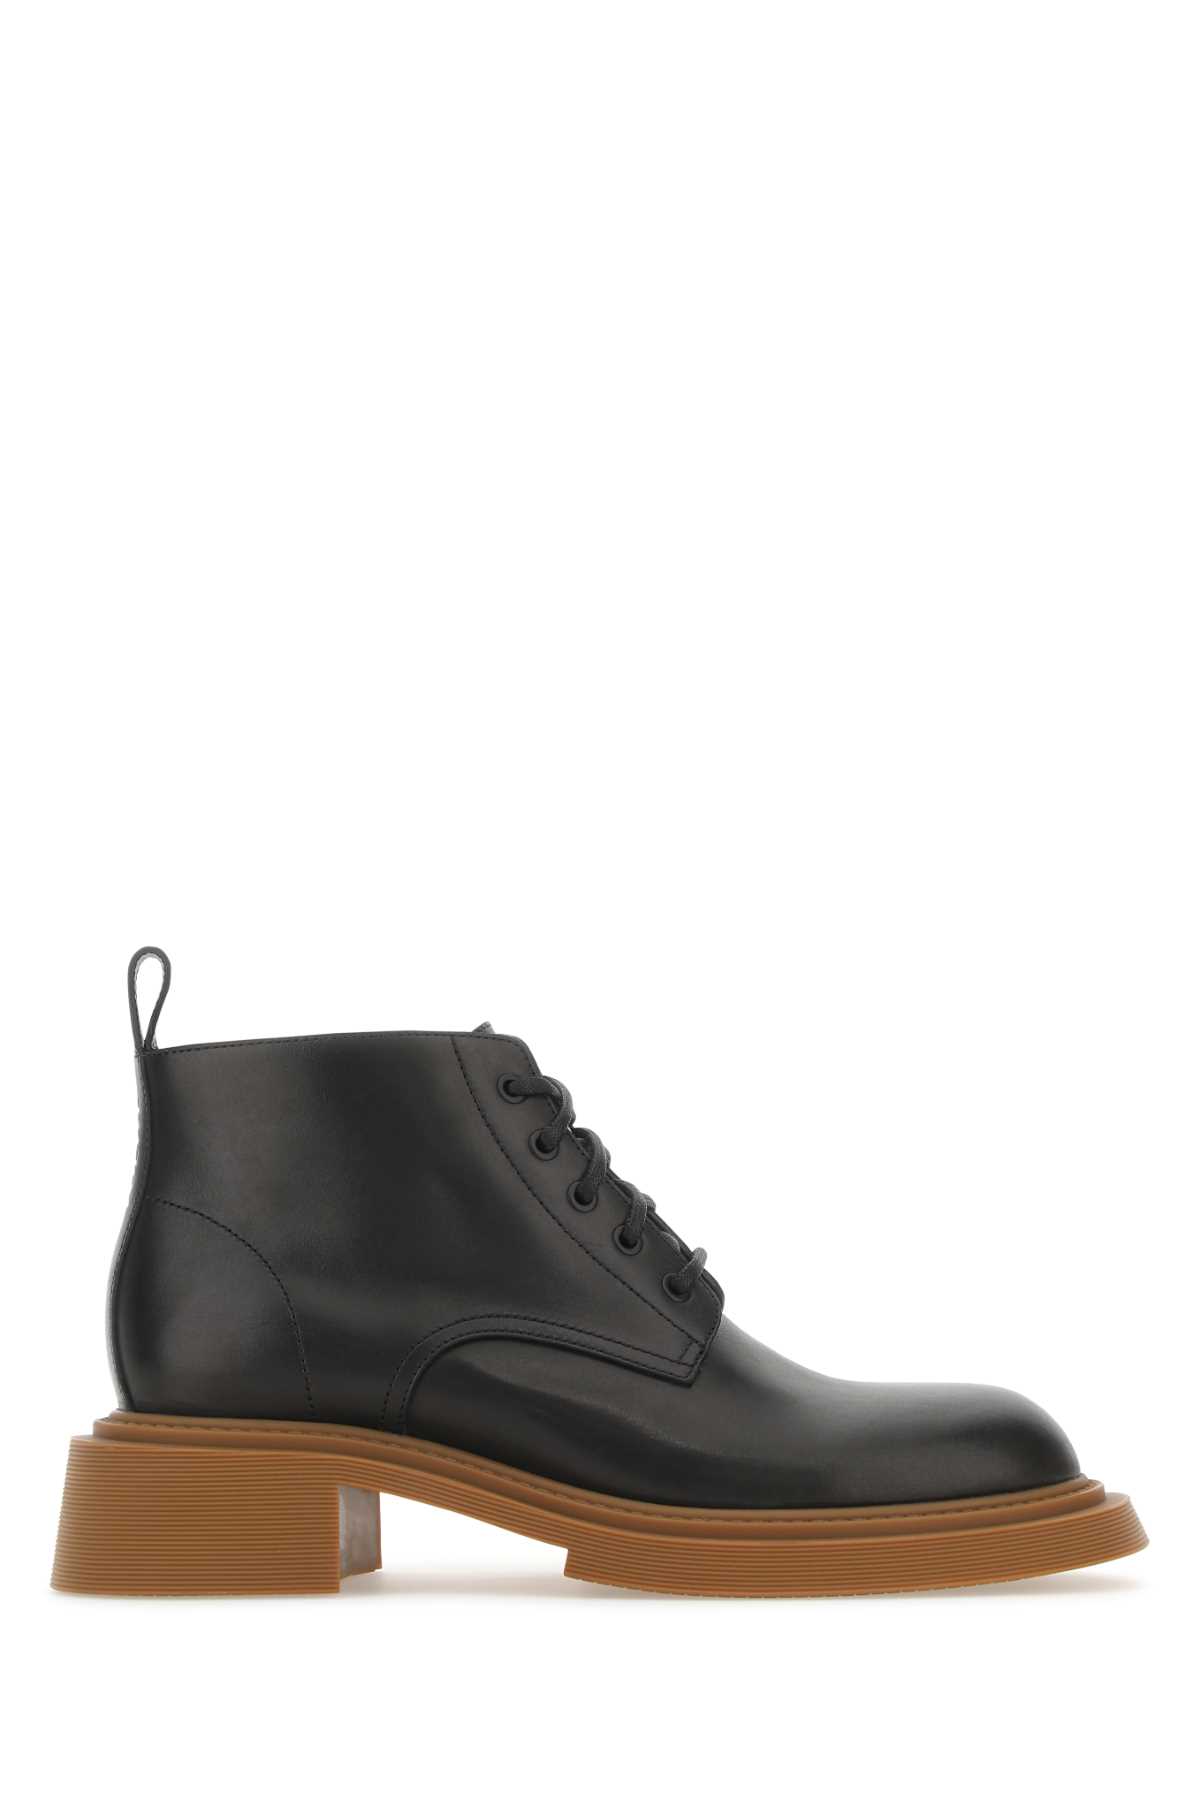 Loewe Black Leather Ankle Boots